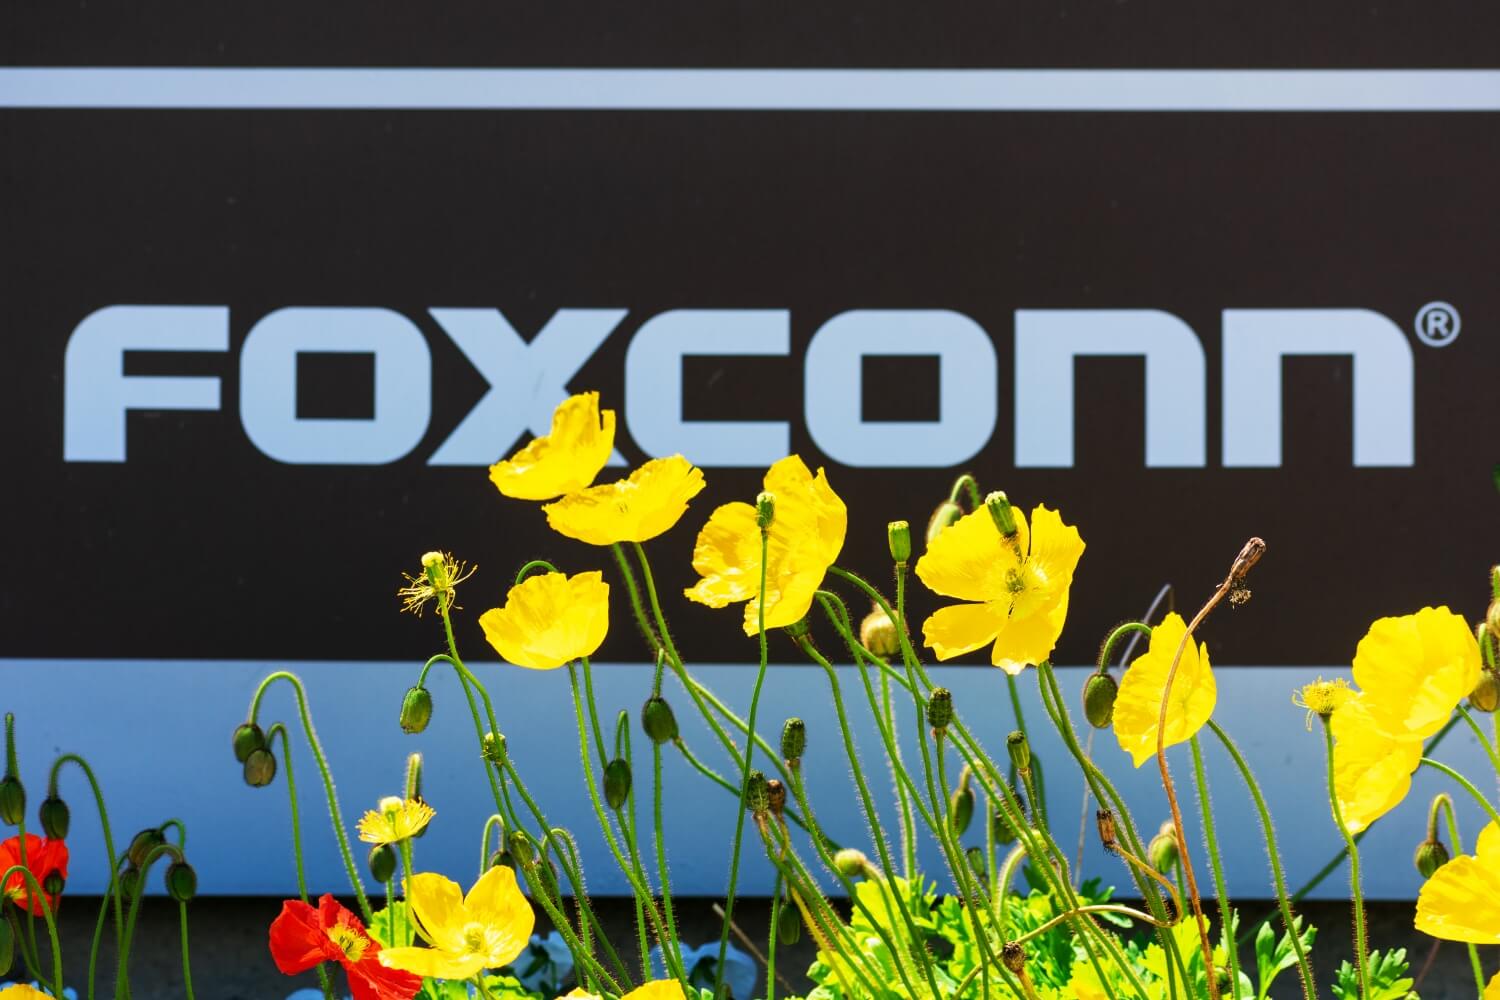 Foxconn hit hard by pandemic in Q1 but looks to get back on track